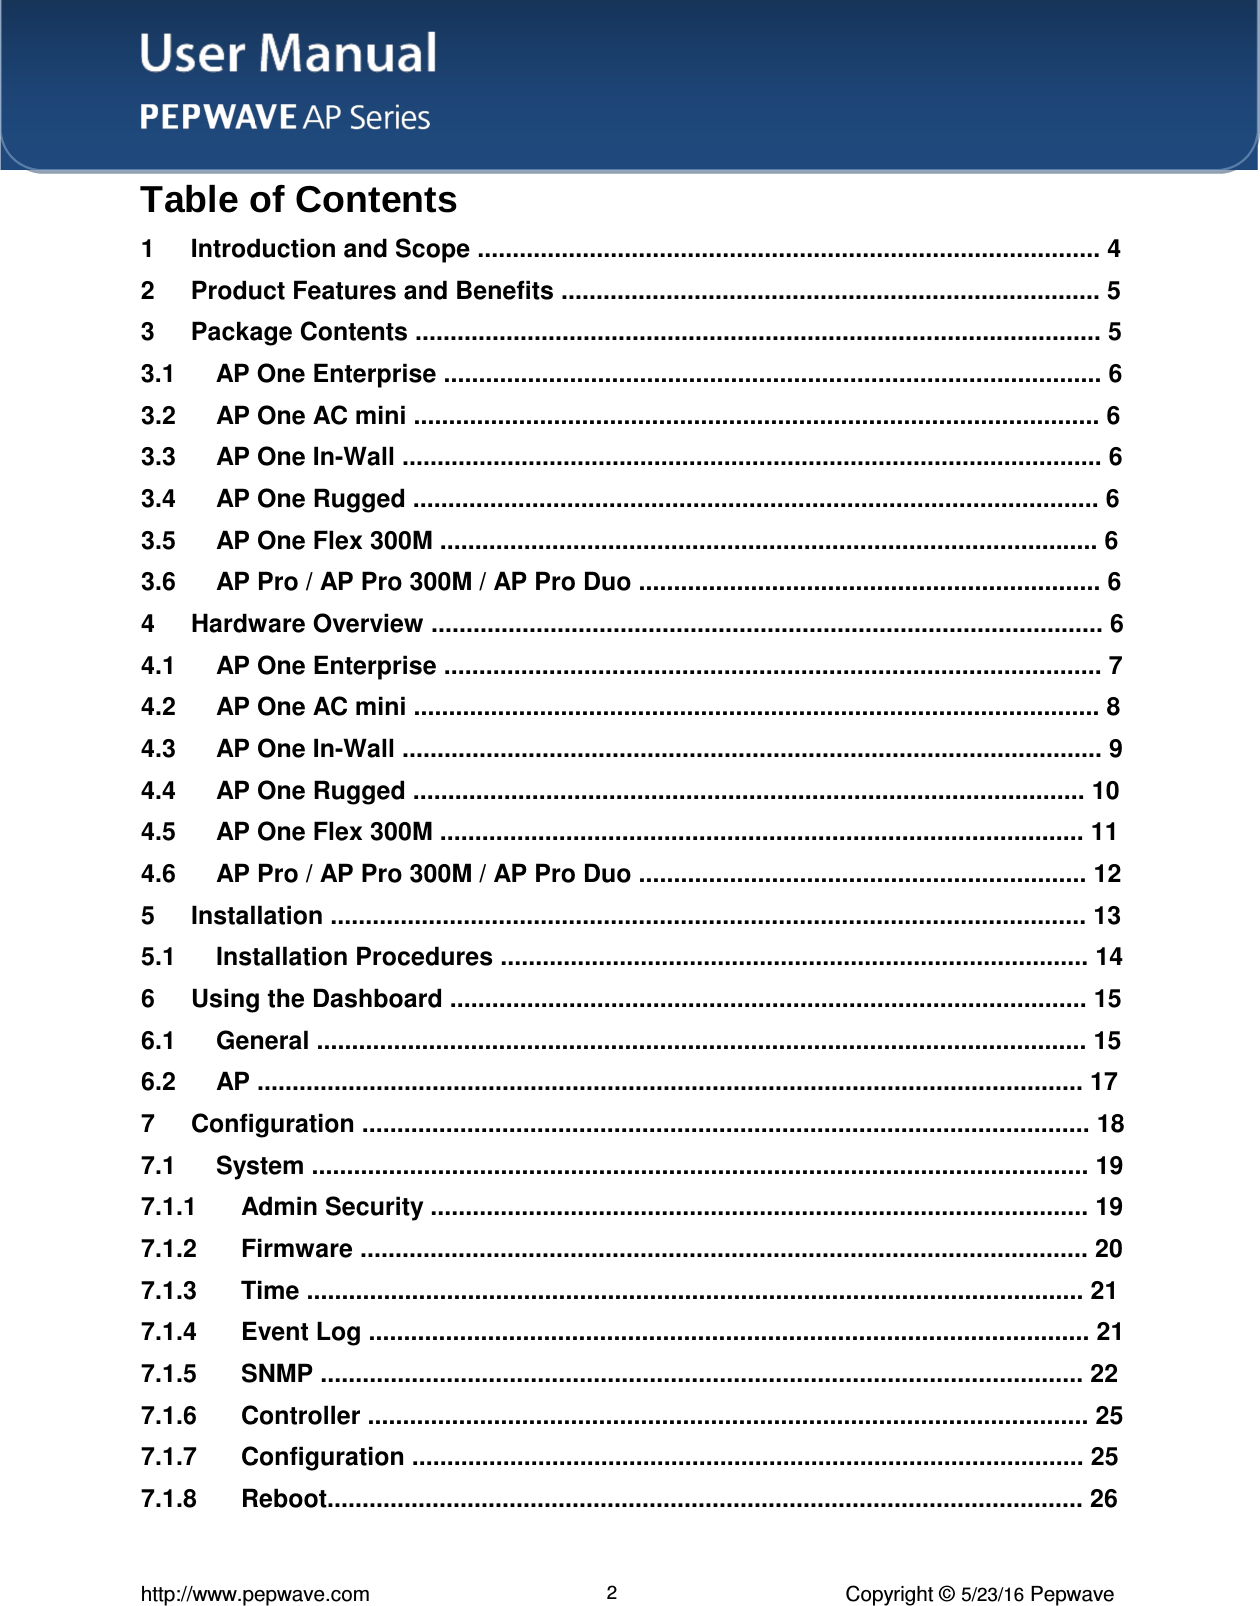 http://www.pepwave.com 2 Copyright © 5/23/16 Pepwave Table of Contents 1  Introduction and Scope ......................................................................................... 4 2  Product Features and Benefits ............................................................................. 5 3  Package Contents .................................................................................................. 5 3.1  AP One Enterprise .............................................................................................. 6 3.2  AP One AC mini .................................................................................................. 6 3.3  AP One In-Wall .................................................................................................... 6 3.4  AP One Rugged .................................................................................................. 6 3.5  AP One Flex 300M .............................................................................................. 6 3.6  AP Pro / AP Pro 300M / AP Pro Duo .................................................................. 6 4  Hardware Overview ................................................................................................ 6 4.1  AP One Enterprise .............................................................................................. 7 4.2  AP One AC mini .................................................................................................. 8 4.3  AP One In-Wall .................................................................................................... 9 4.4  AP One Rugged ................................................................................................ 10 4.5  AP One Flex 300M ............................................................................................ 11 4.6  AP Pro / AP Pro 300M / AP Pro Duo ................................................................ 12 5  Installation ............................................................................................................ 13 5.1  Installation Procedures .................................................................................... 14 6  Using the Dashboard ........................................................................................... 15 6.1  General .............................................................................................................. 15 6.2  AP ...................................................................................................................... 17 7  Configuration ........................................................................................................ 18 7.1  System ............................................................................................................... 19 7.1.1  Admin Security .............................................................................................. 19 7.1.2  Firmware ........................................................................................................ 20 7.1.3  Time ............................................................................................................... 21 7.1.4  Event Log ....................................................................................................... 21 7.1.5  SNMP ............................................................................................................. 22 7.1.6  Controller ....................................................................................................... 25 7.1.7  Configuration ................................................................................................ 25 7.1.8  Reboot............................................................................................................ 26 